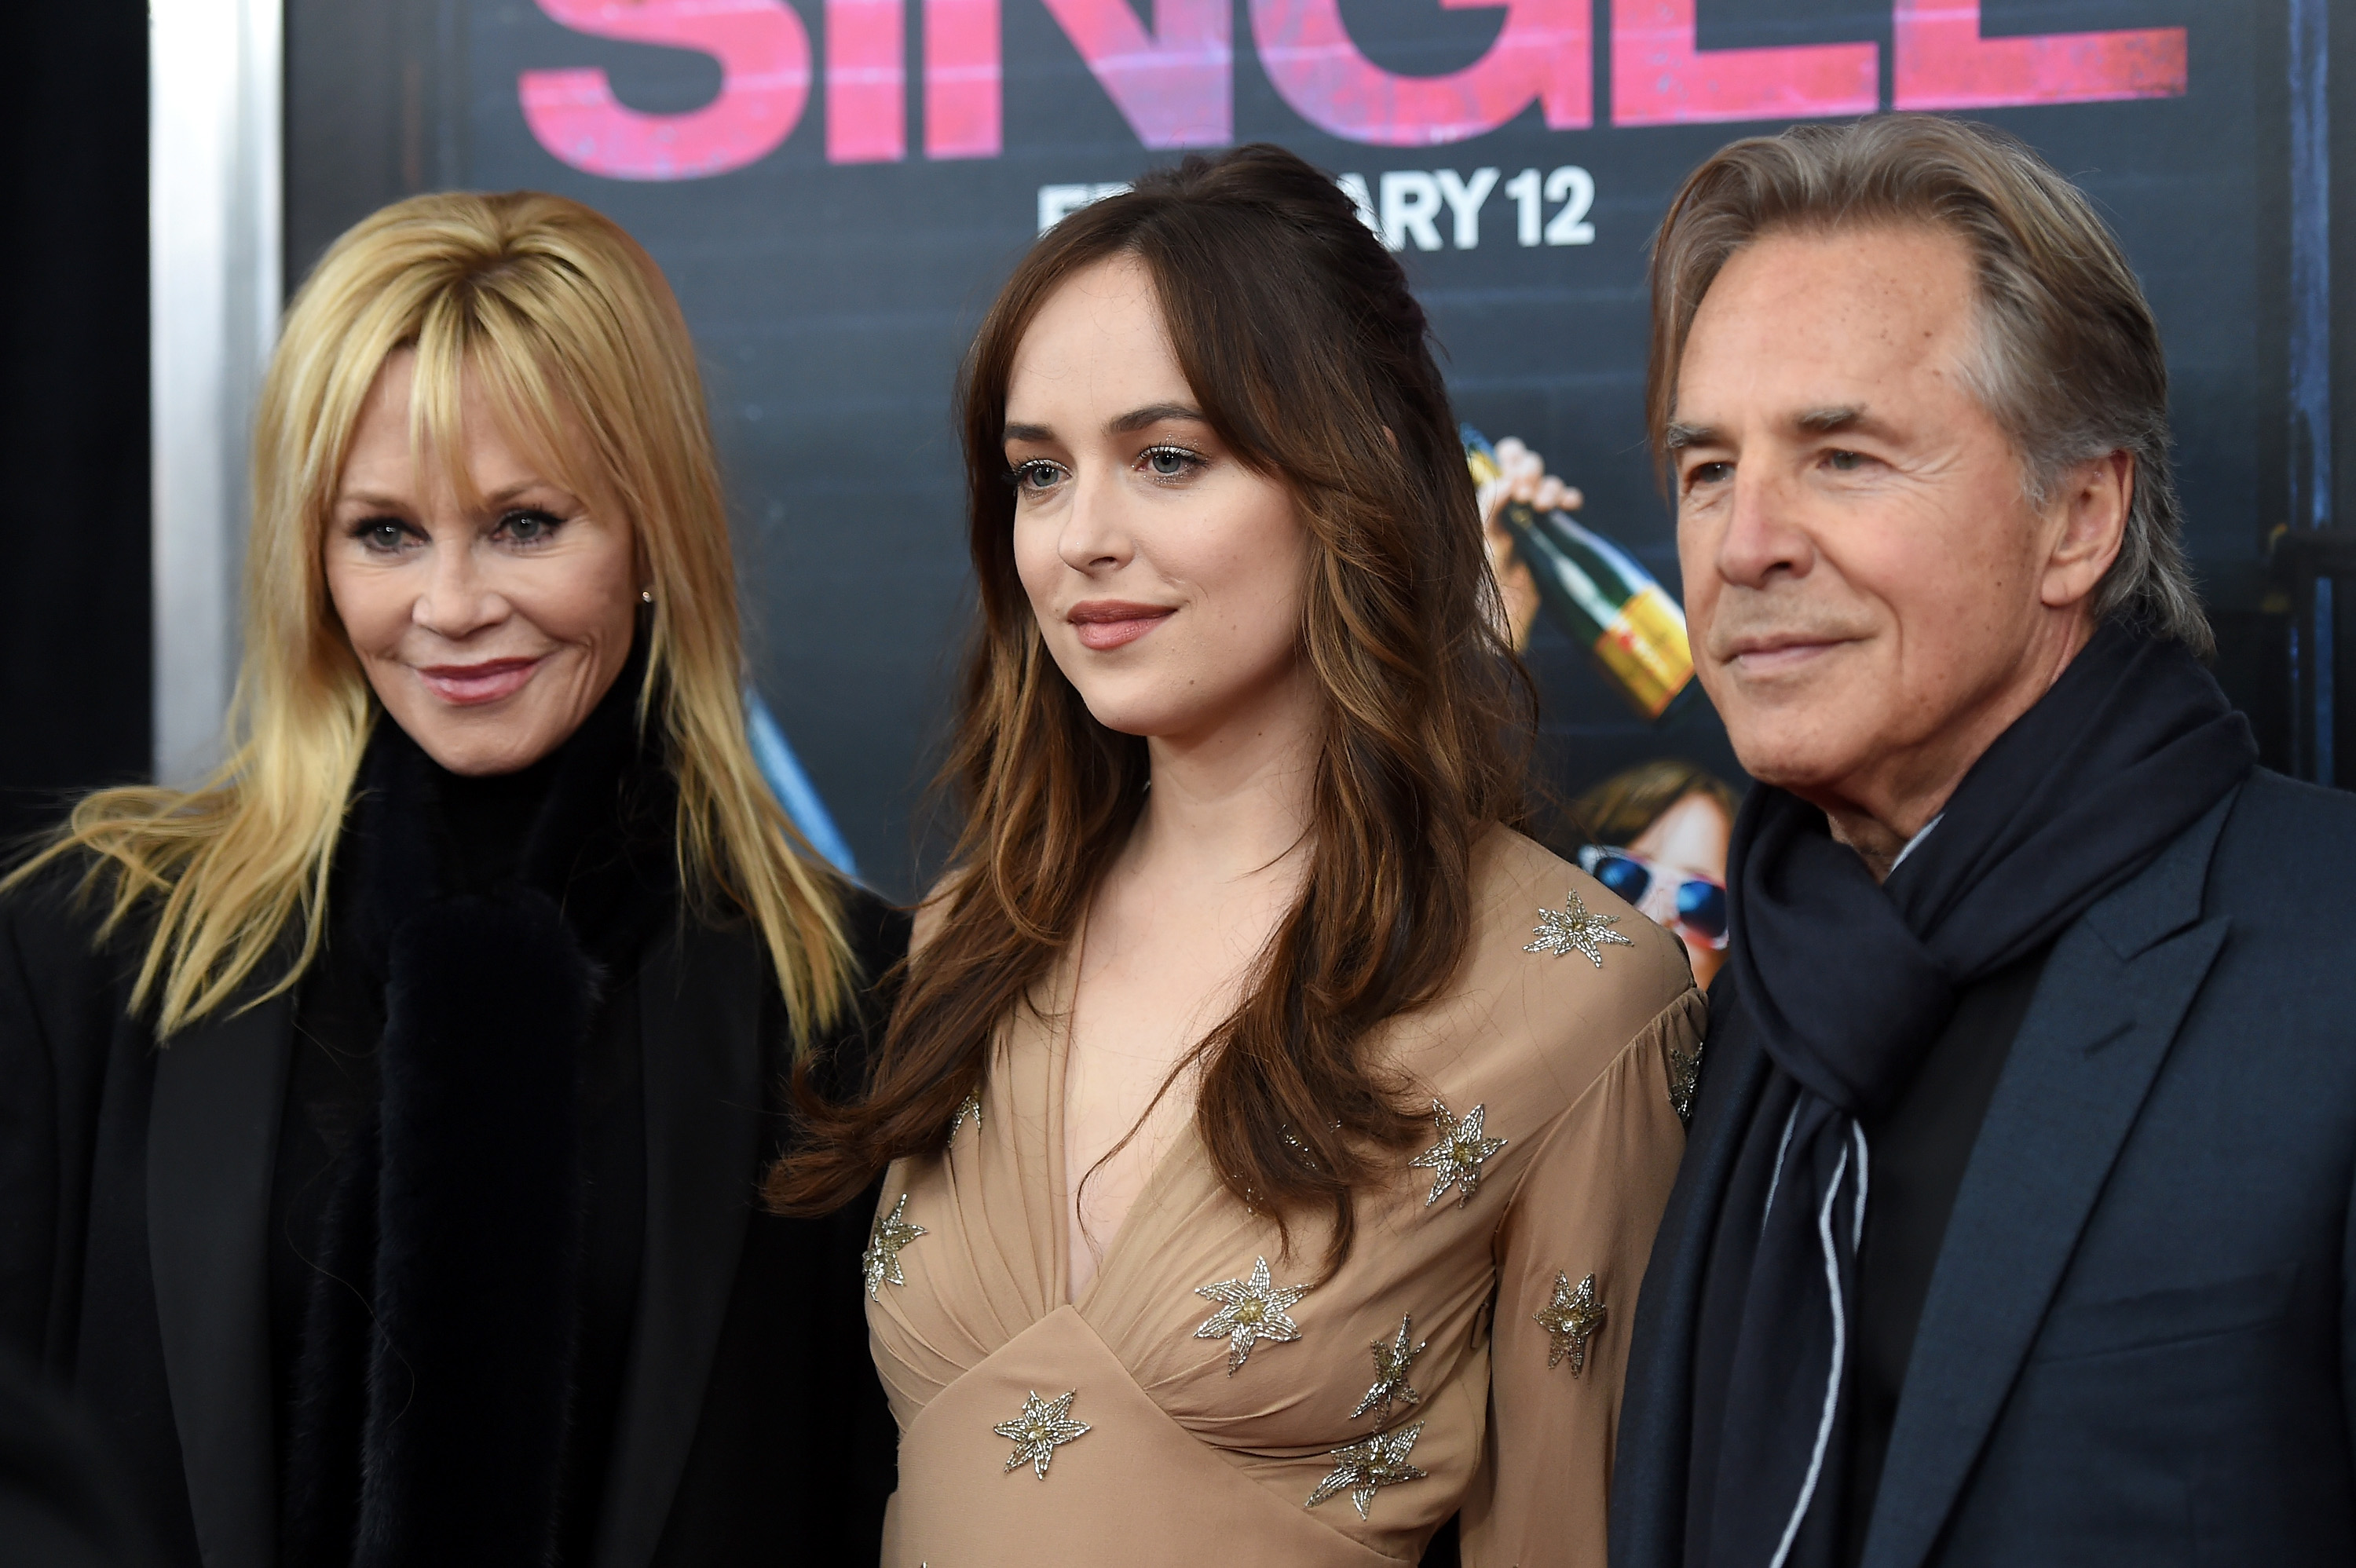 Melanie Griffith, Dakota Johnson, and Don Johnson on February 3, 2016 in New York City. | Source: Getty Images